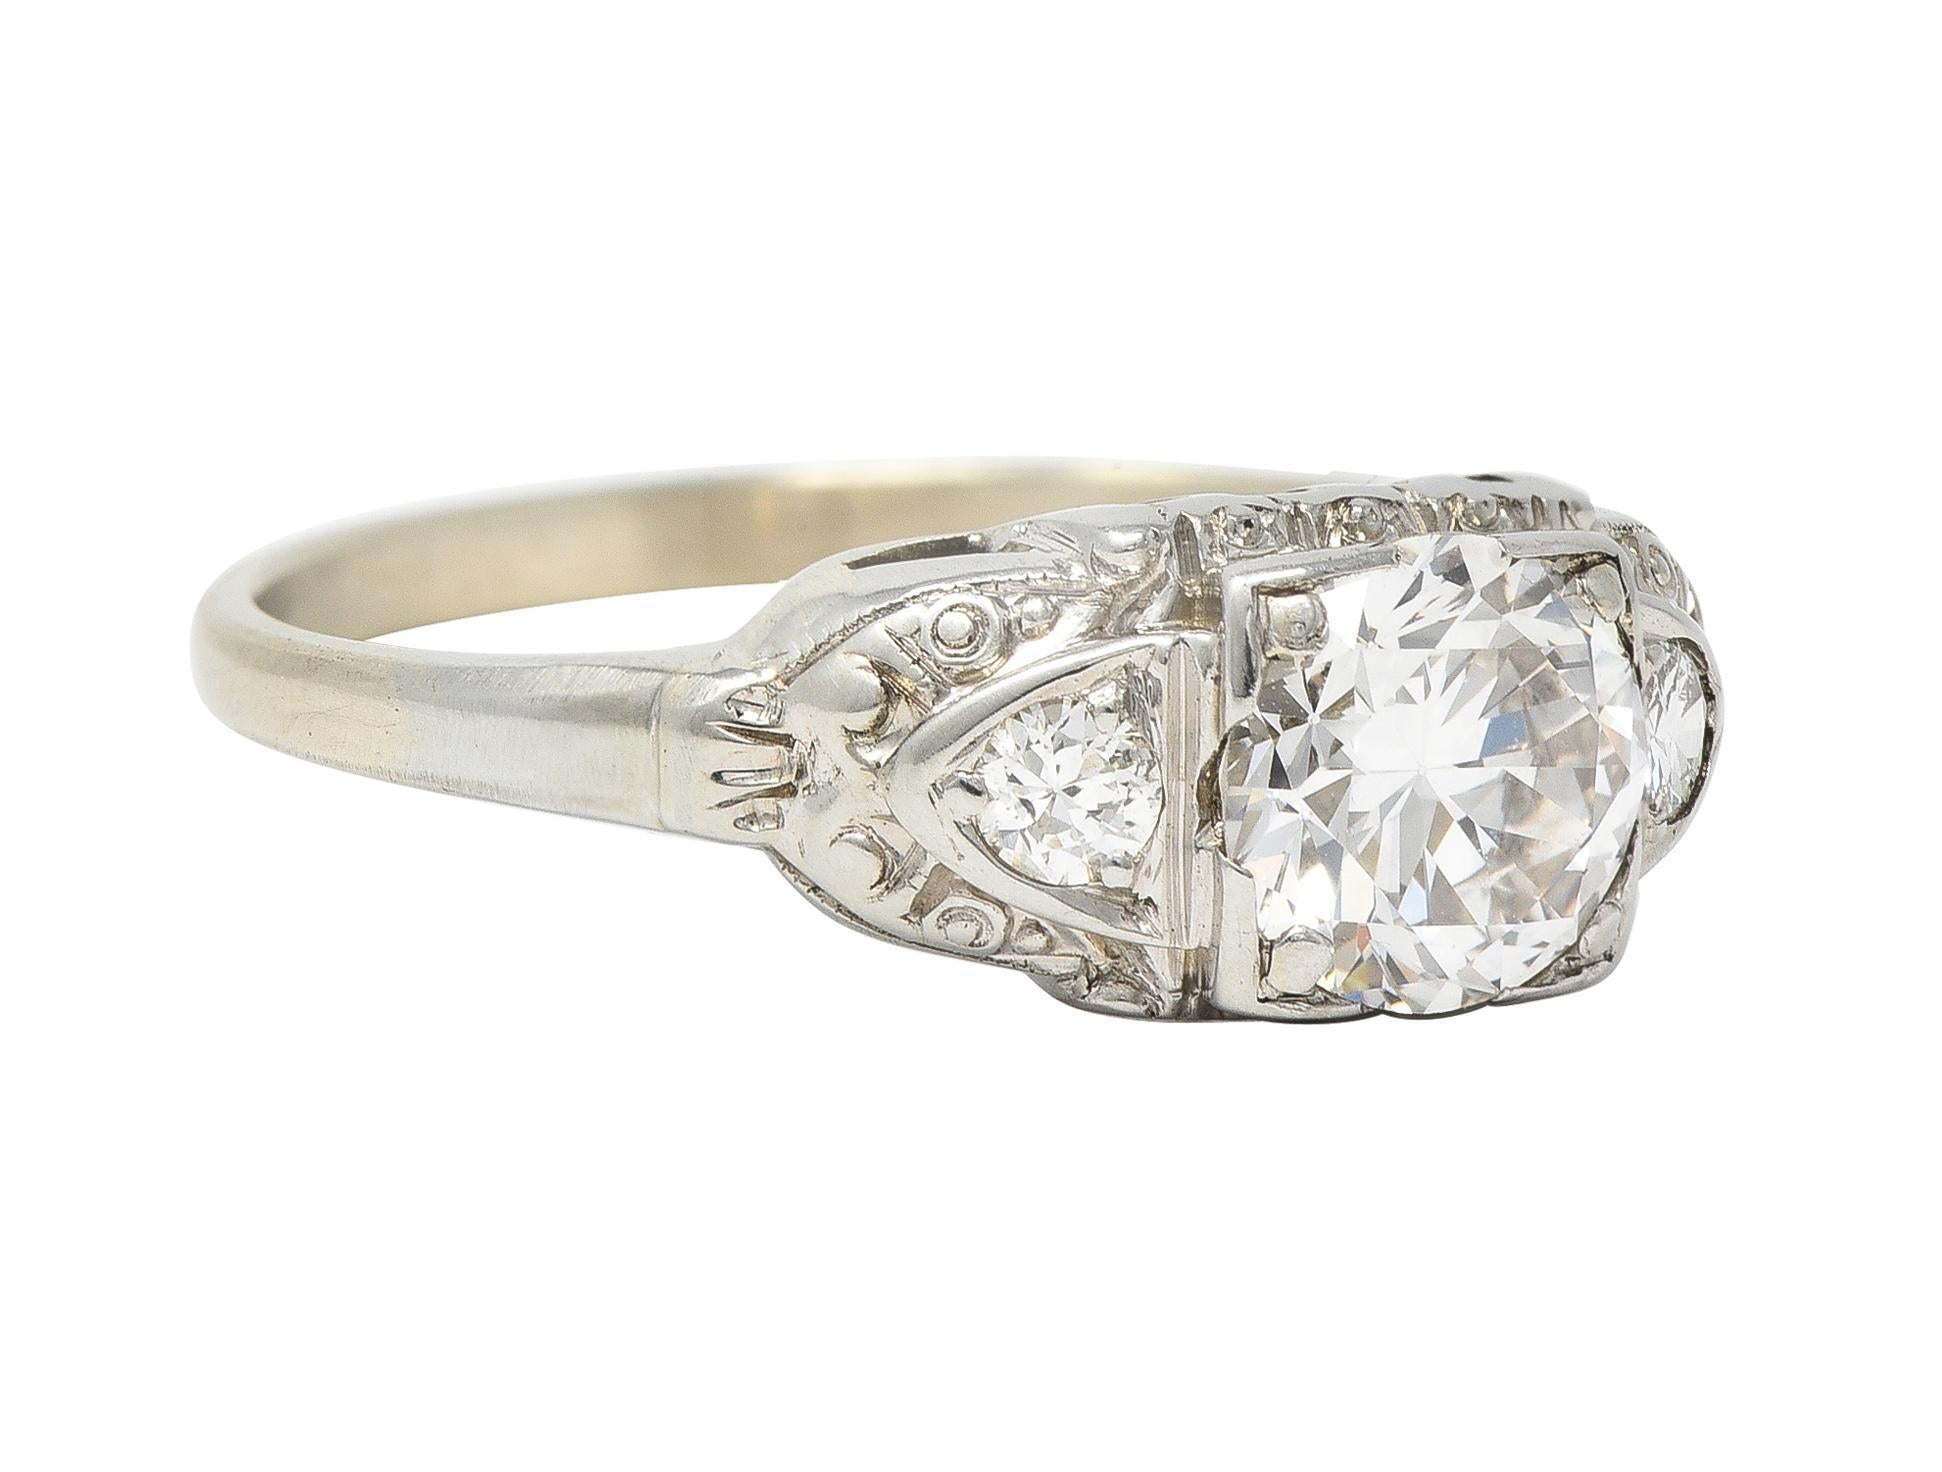 Featuring a transitional cut diamond weighing approximately 0.85 carat - J color with VS clarity
Set low in a square form head and flanked by two transitional cut diamonds
Weighing collectively approximately 0.10 carat - eye clean and